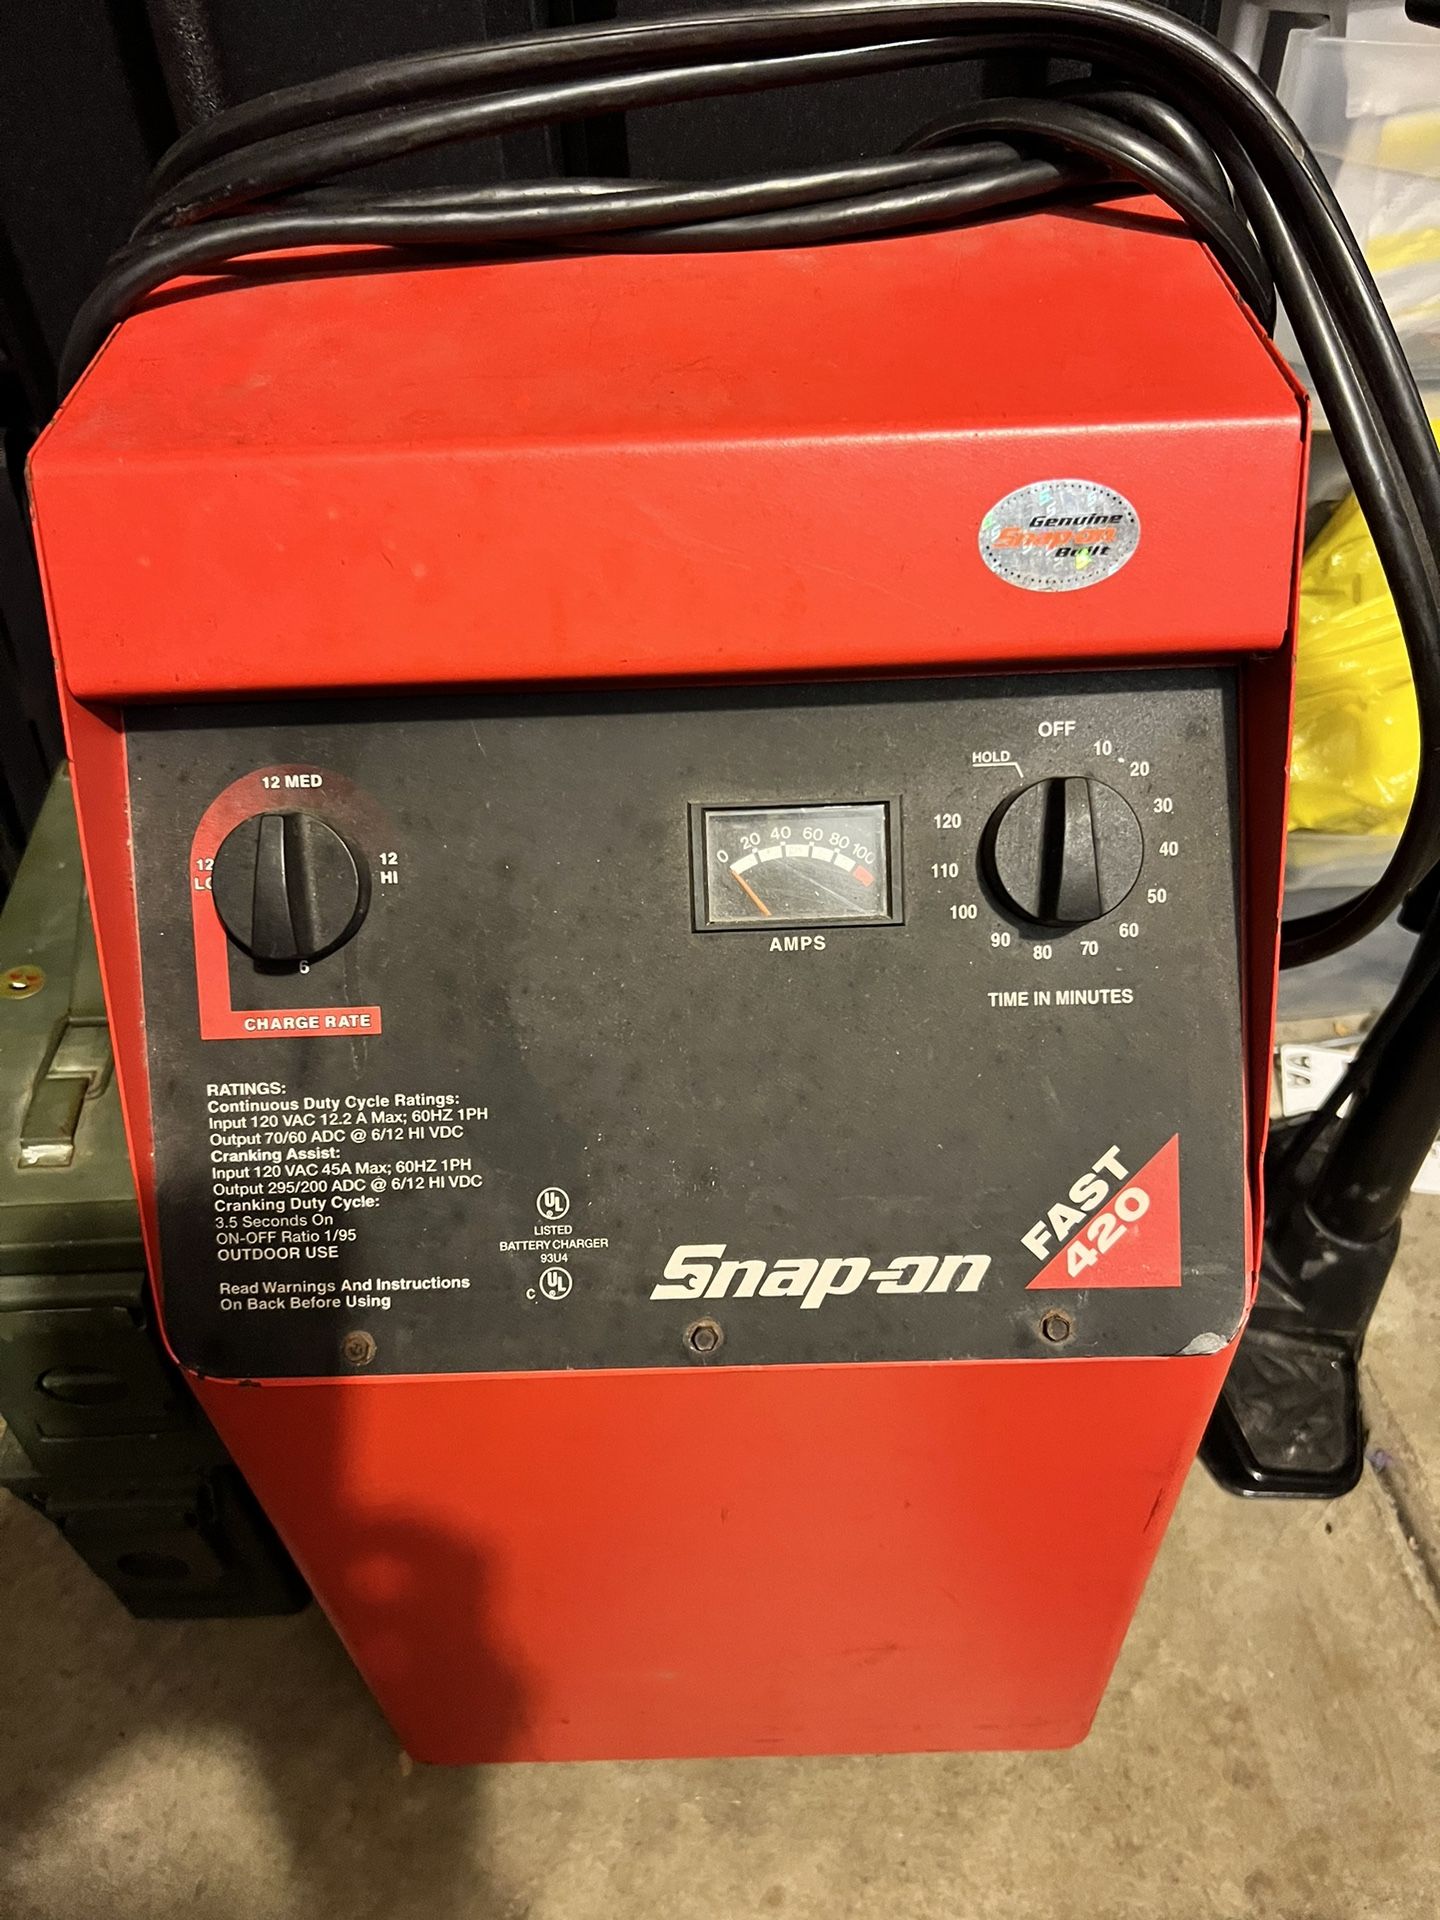 Professional Snap-on Fast 420 Battery Charger